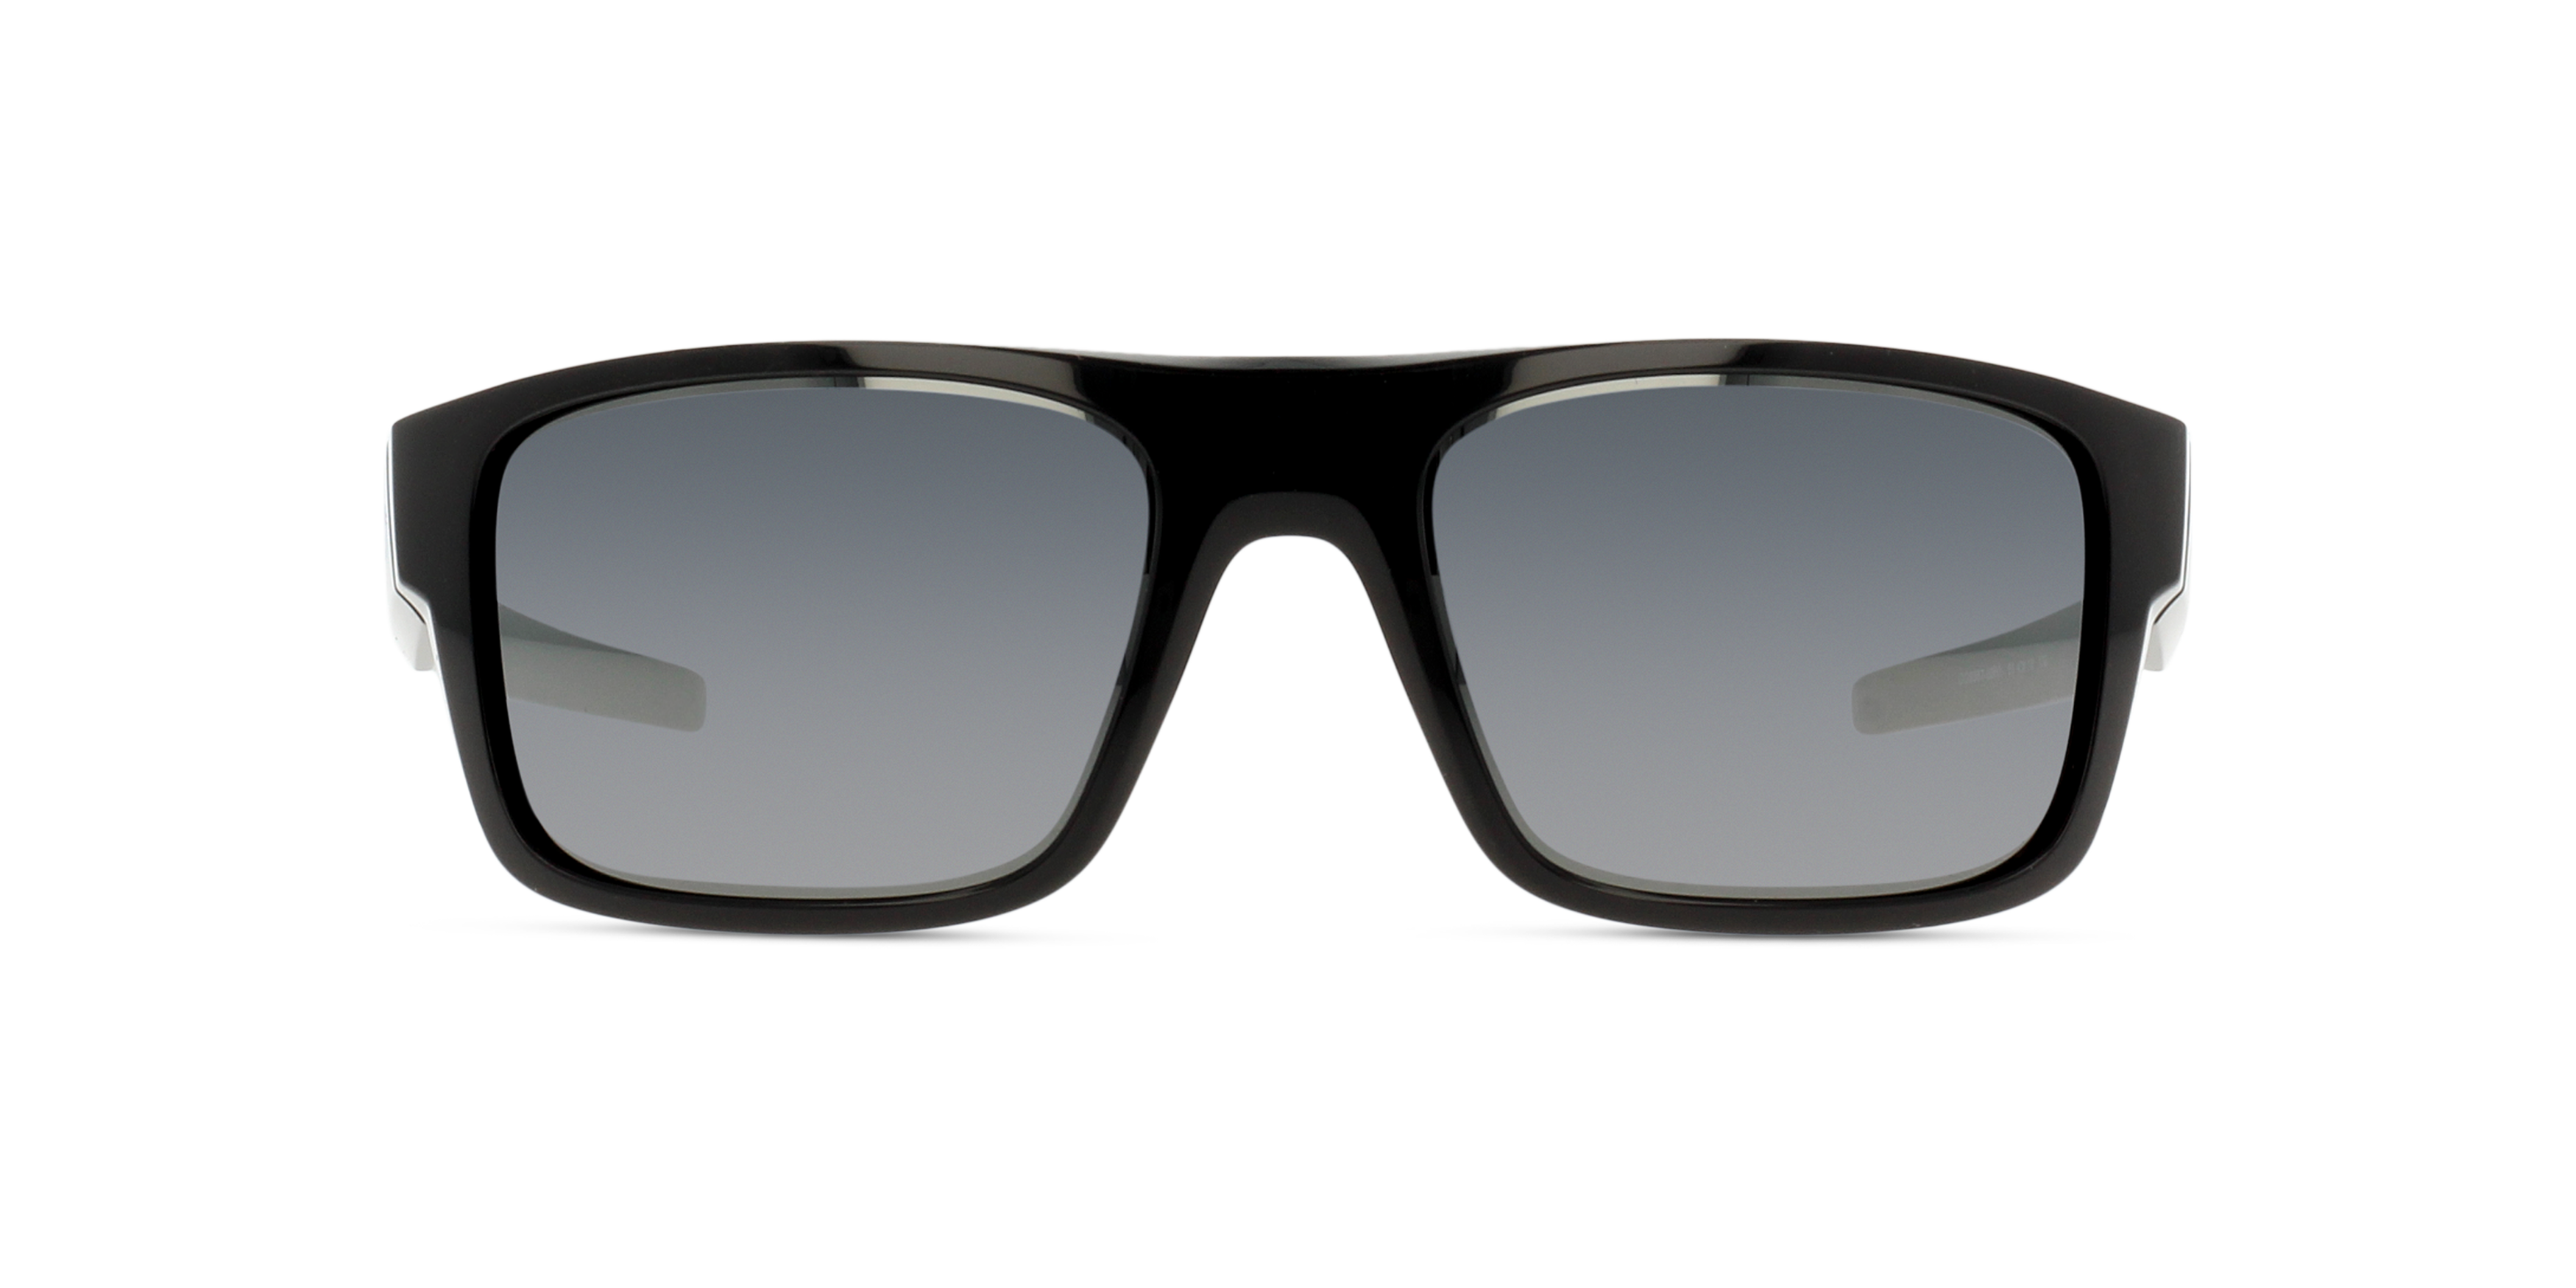 [products.image.front] OAKLEY DROP POINT OO9367 936702